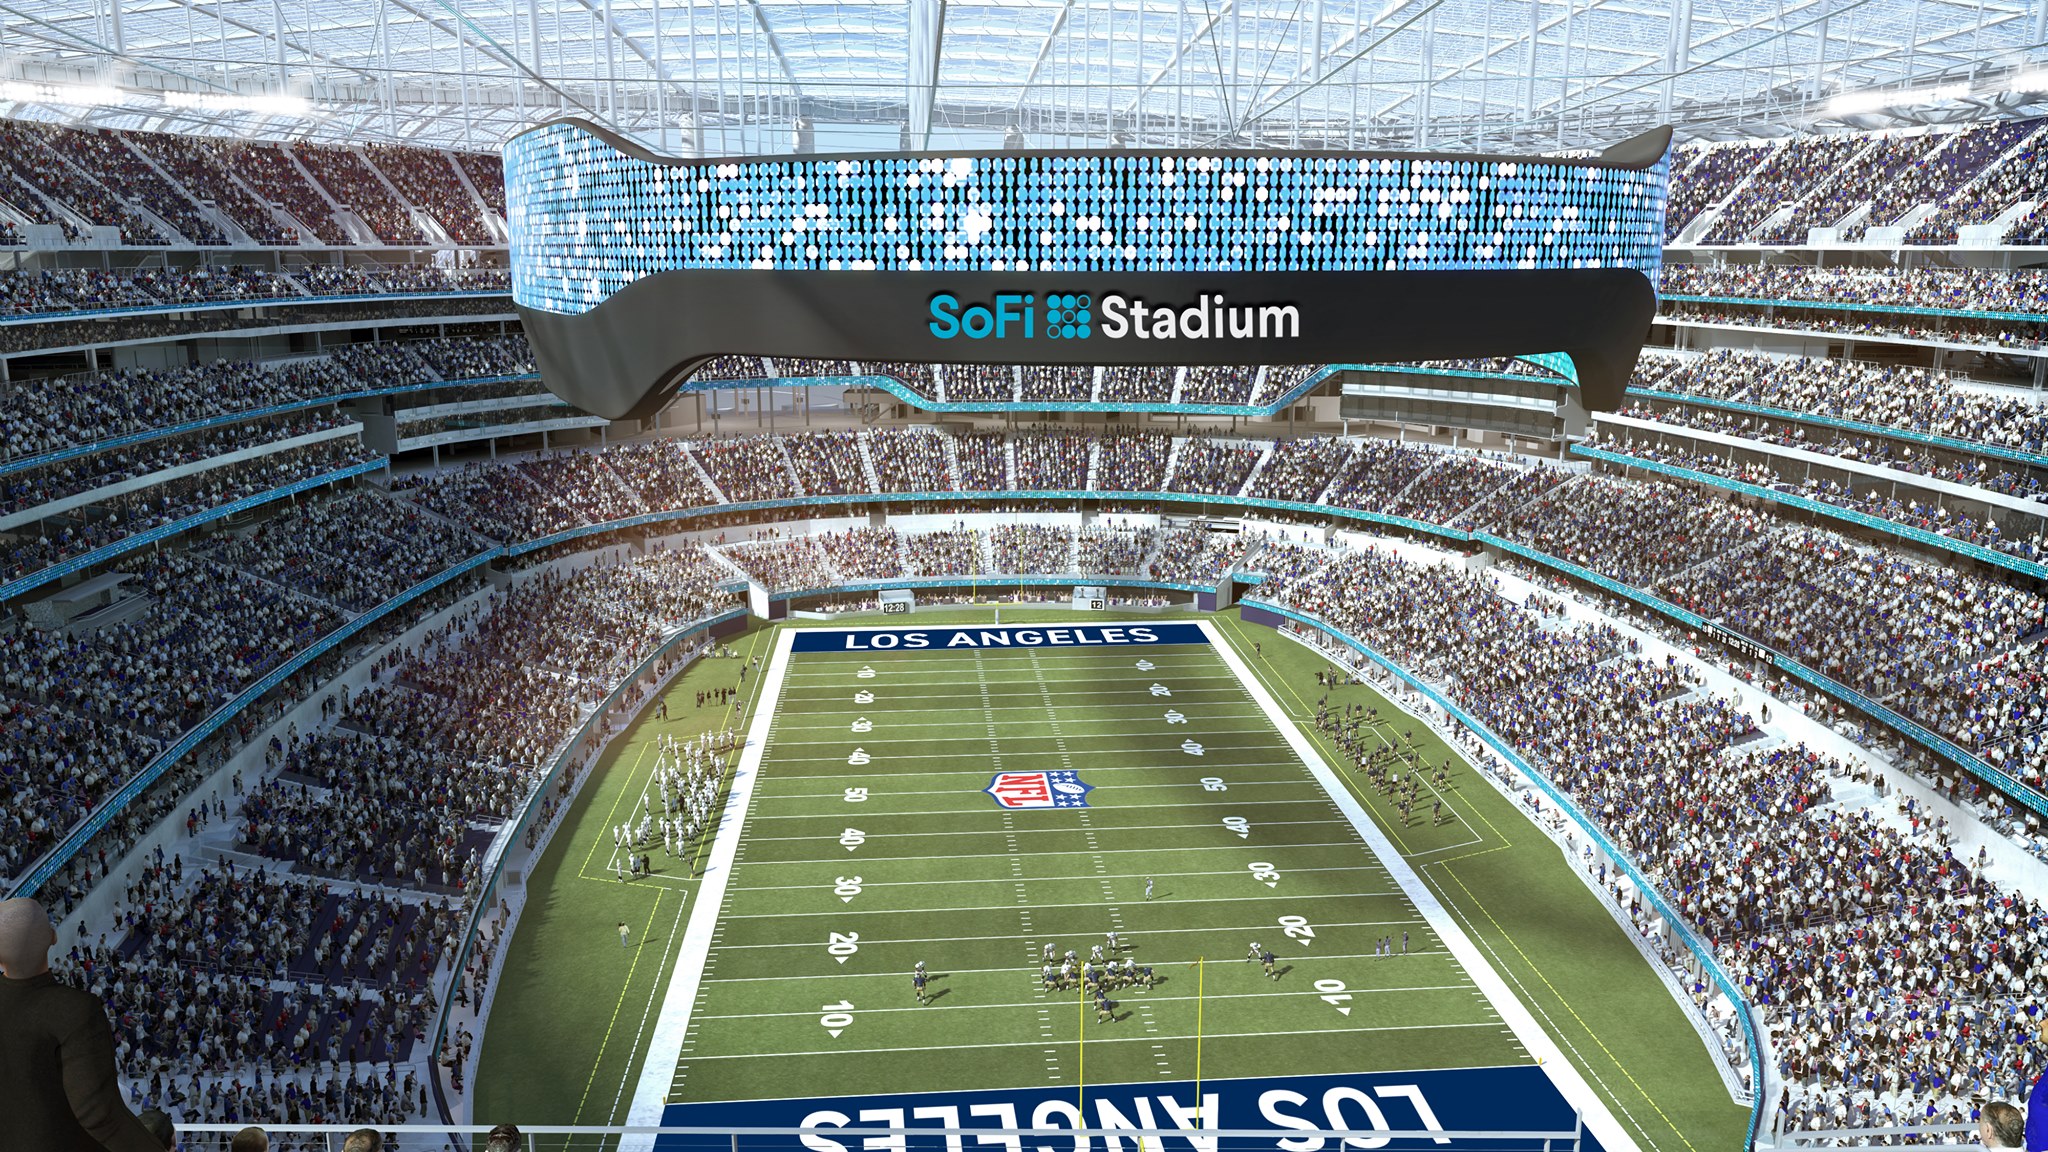 A render of the new SoFi Stadium in Inglewood. It is full of people, and a football game is playing on the field